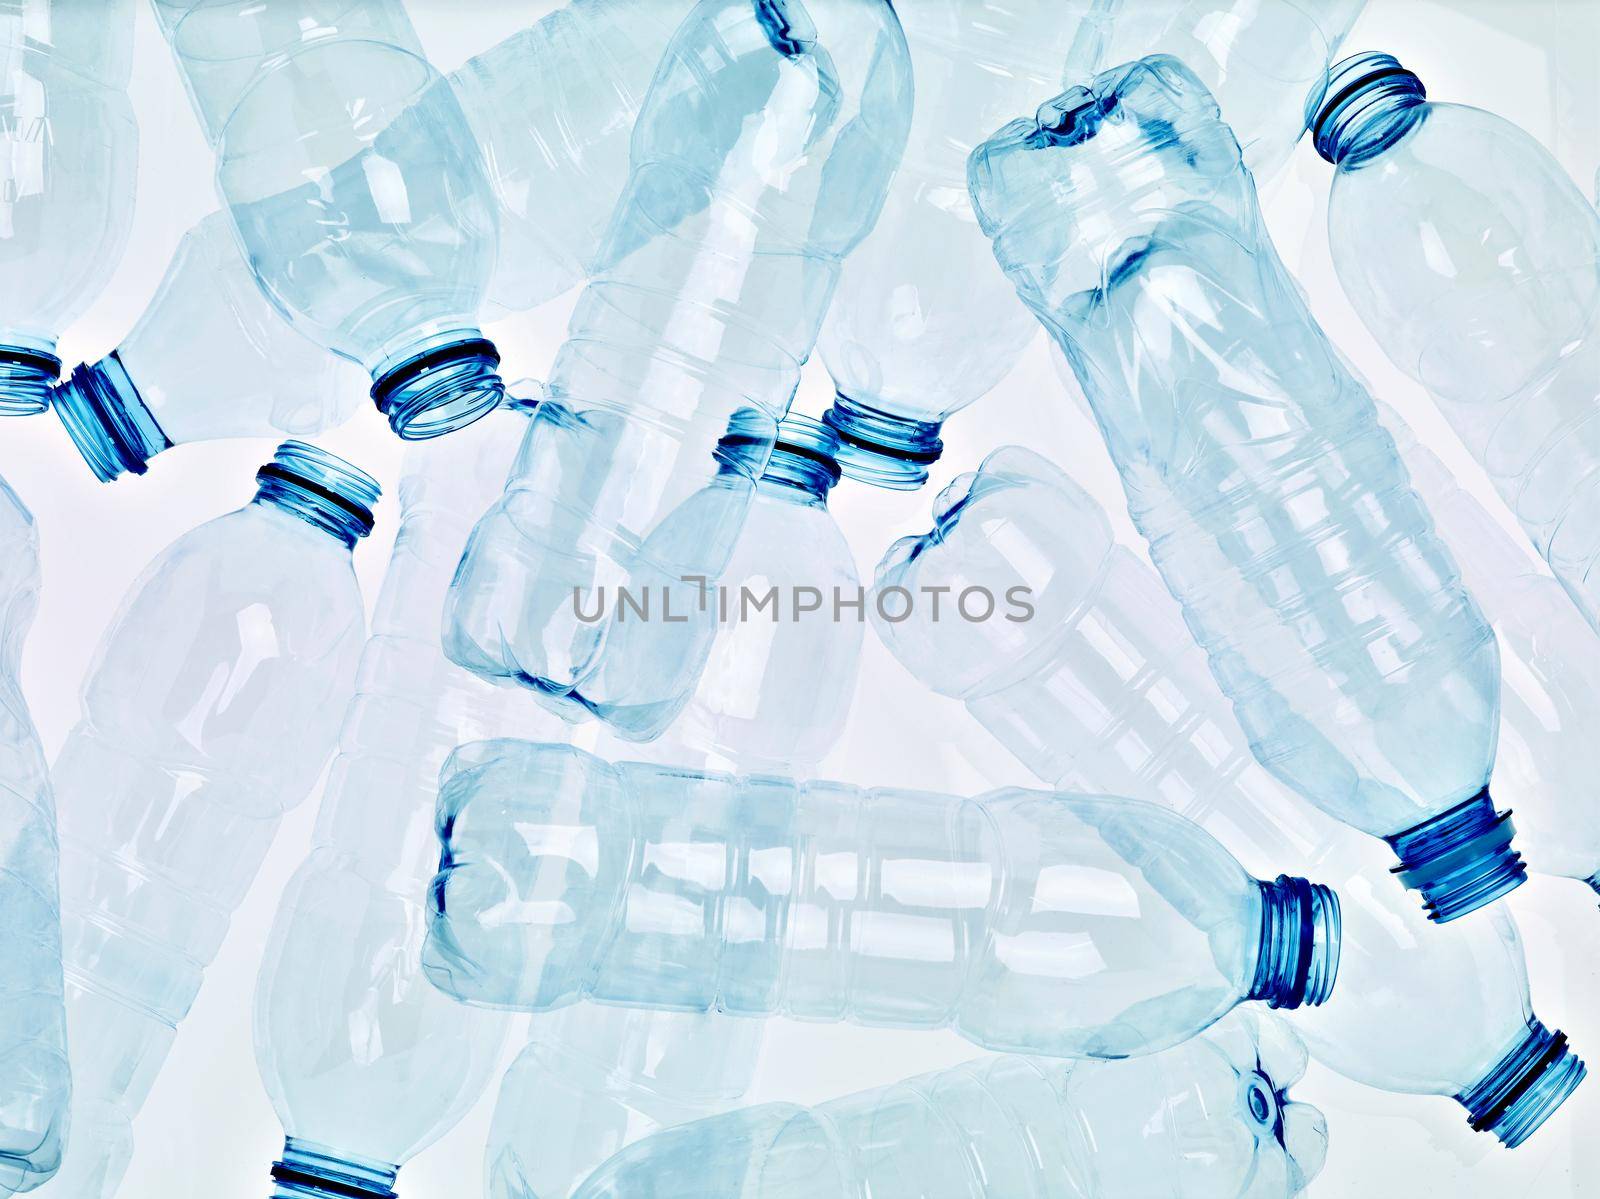 plastic bottle empty transparent recycling container water environment drink garbage beverage by Picsfive